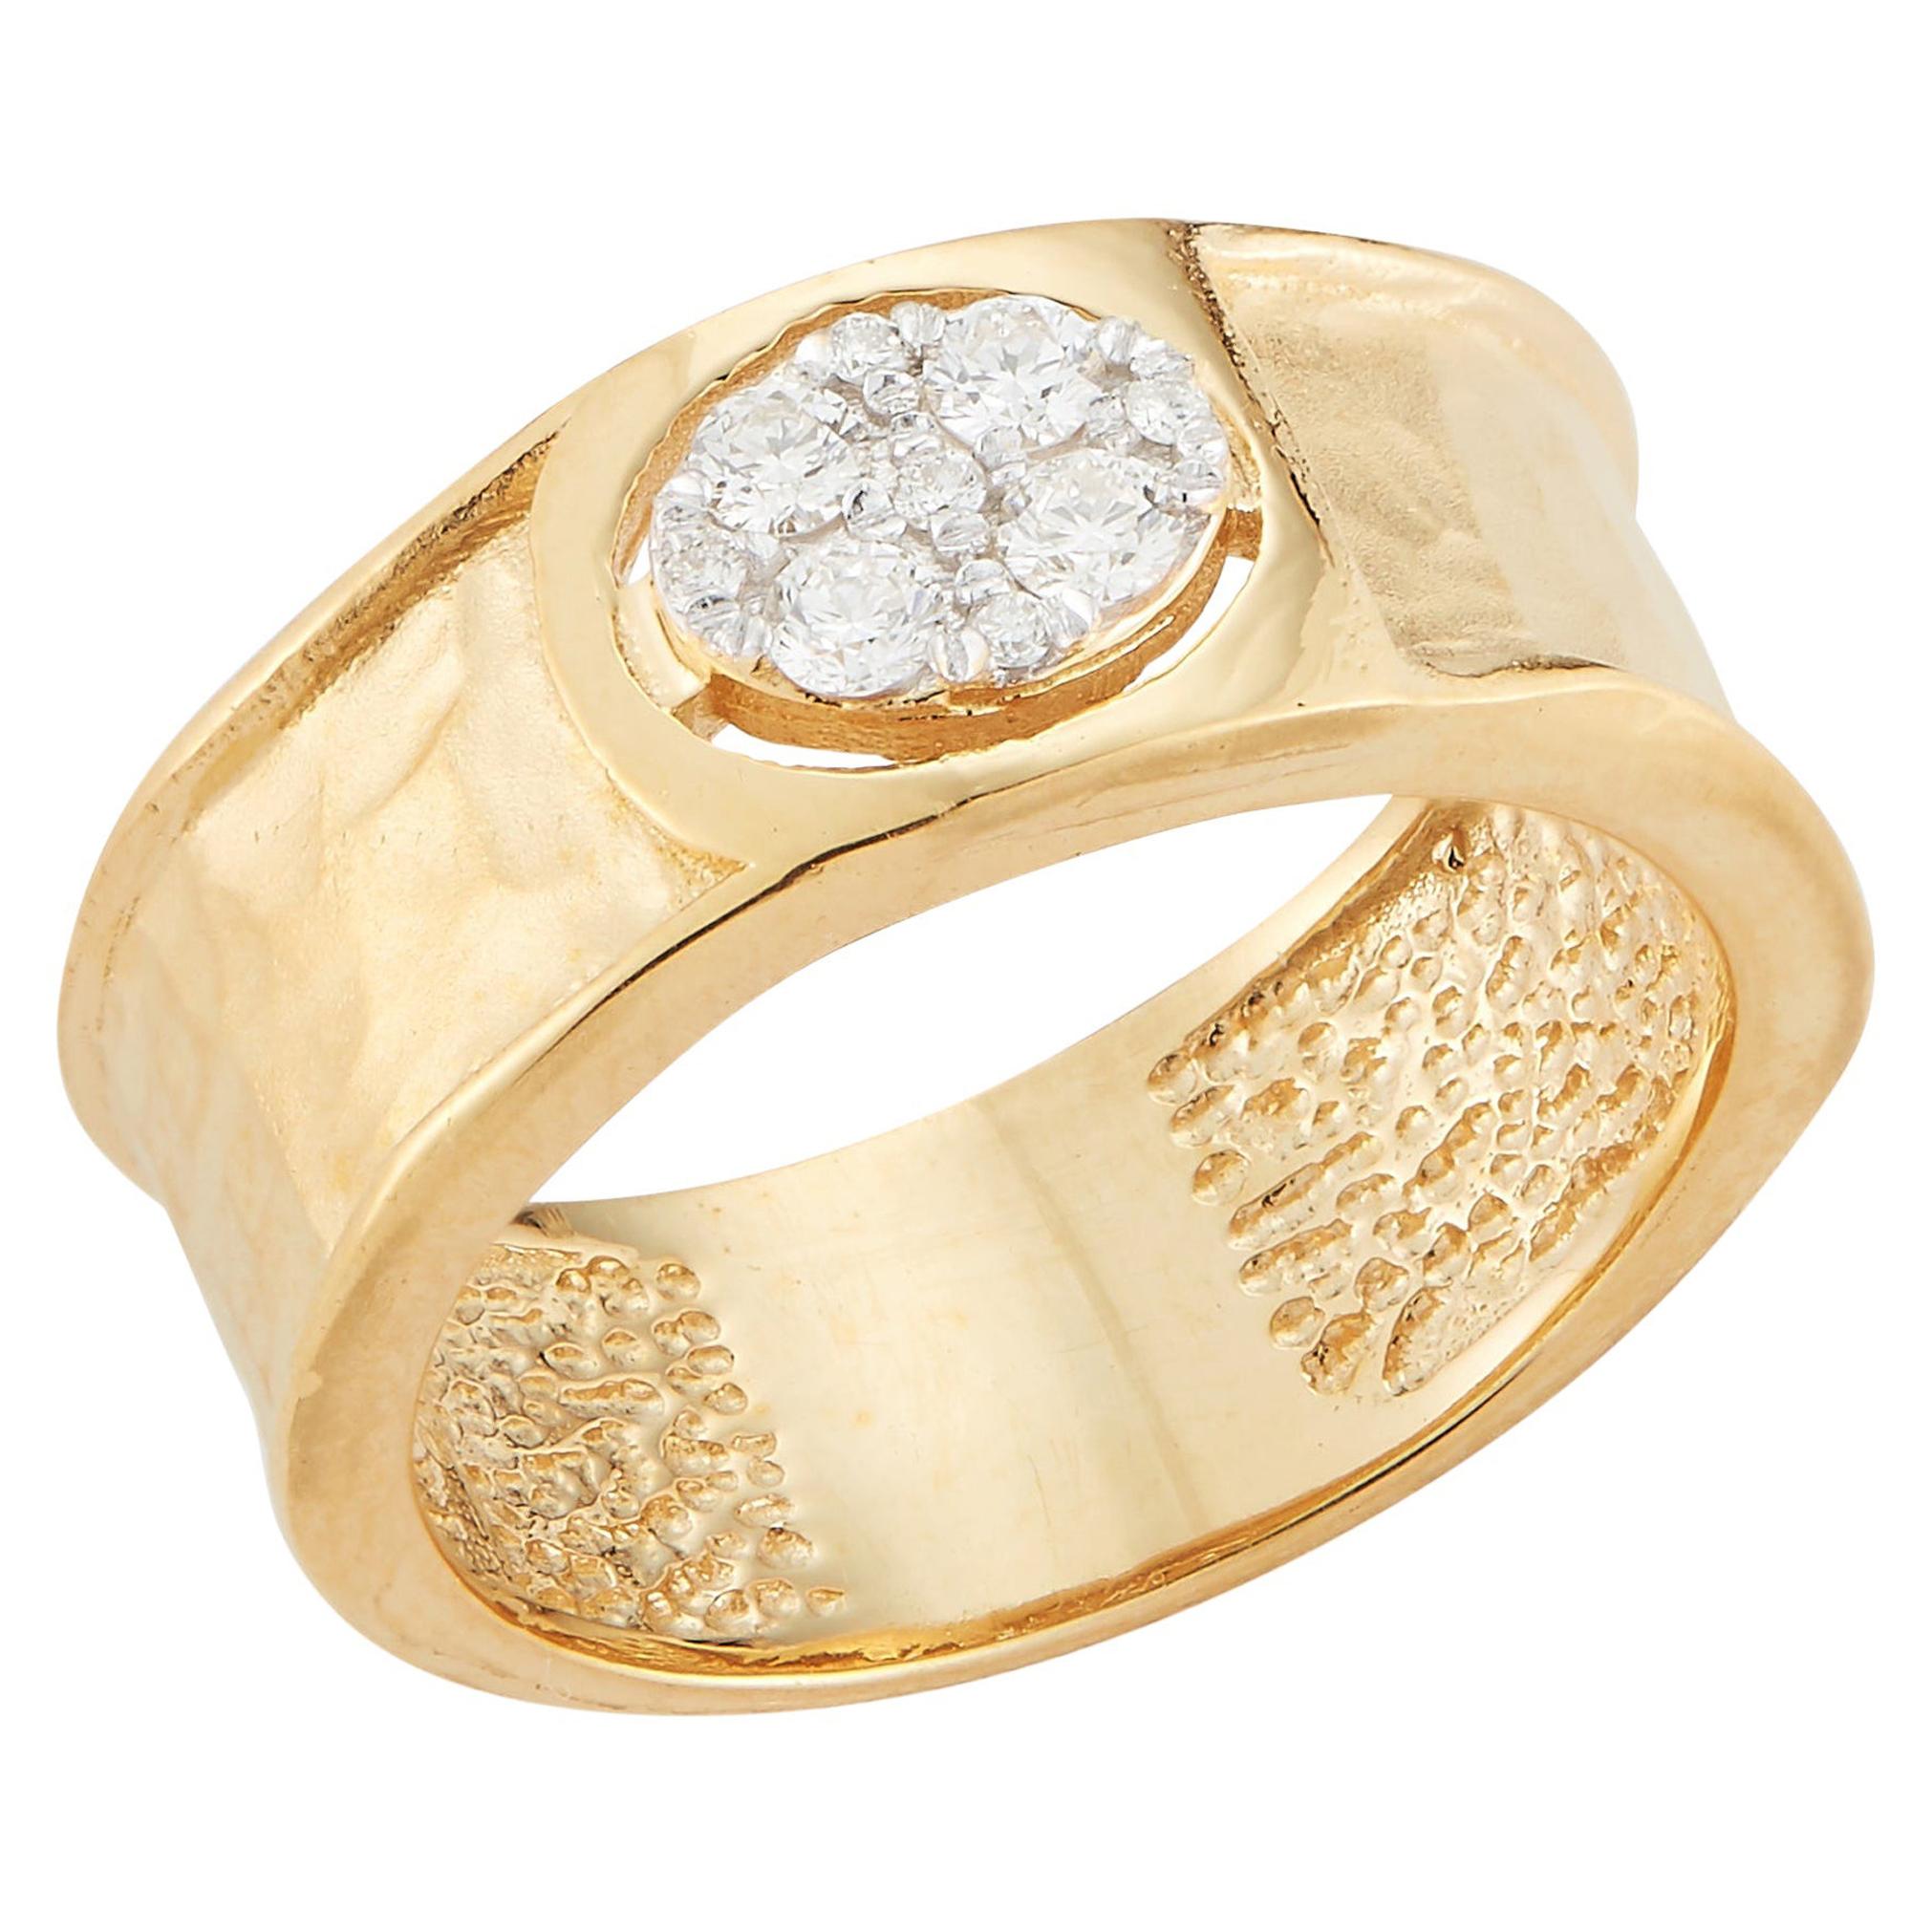 For Sale:  Handcrafted 14 Karat Yellow Gold Hammered Ring with an Oval Diamond Motif